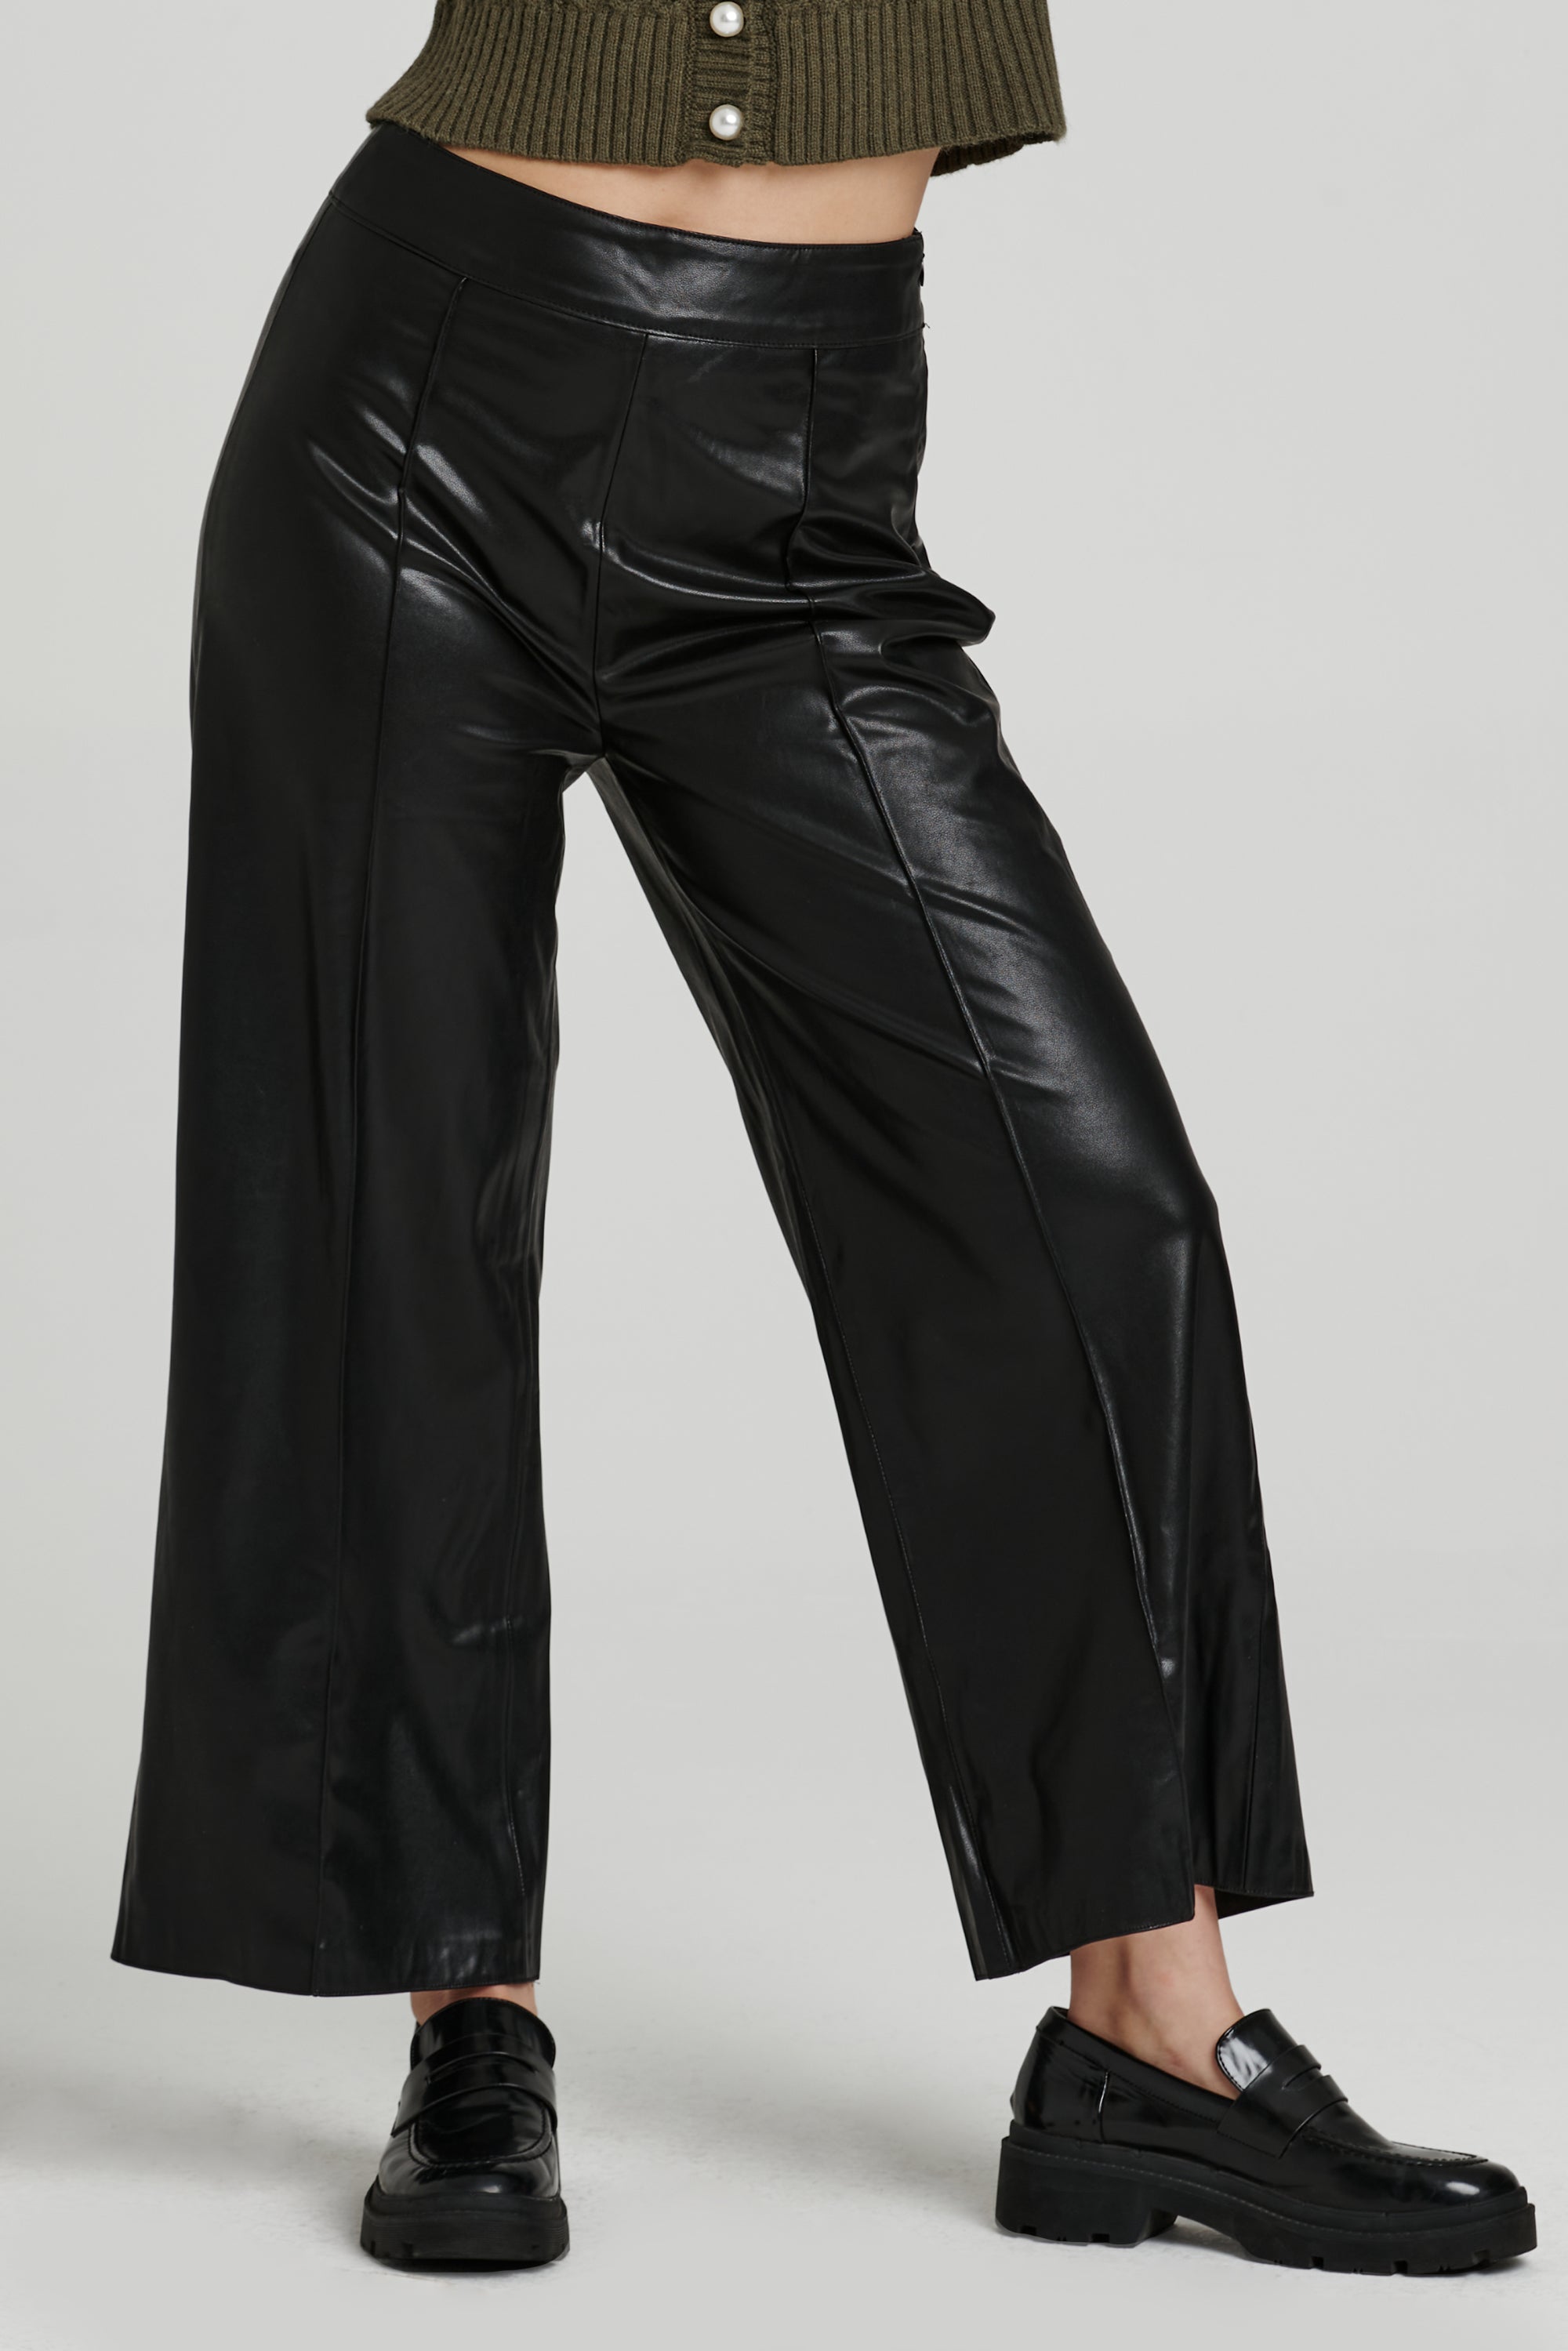 THE MARCELLE LEATHER WIDE LEG PANT | BLACK - PFEIFFER